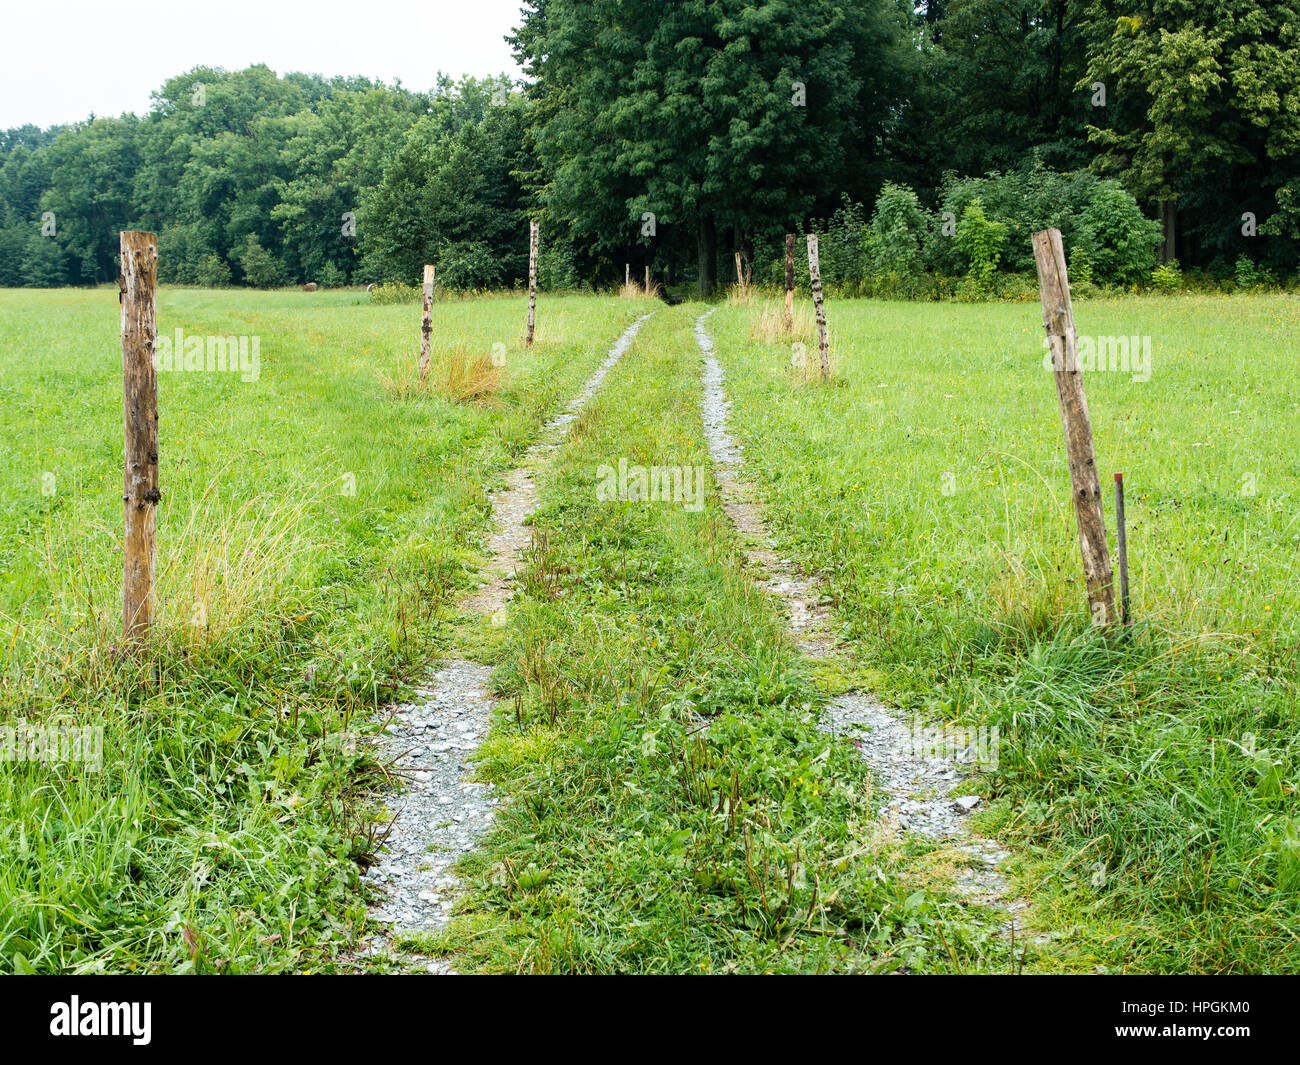 Beaten track or worn path through meadow toward foliage trees with poles around, center composition, moving towards objective, lush and fresh, natural Stock Photo